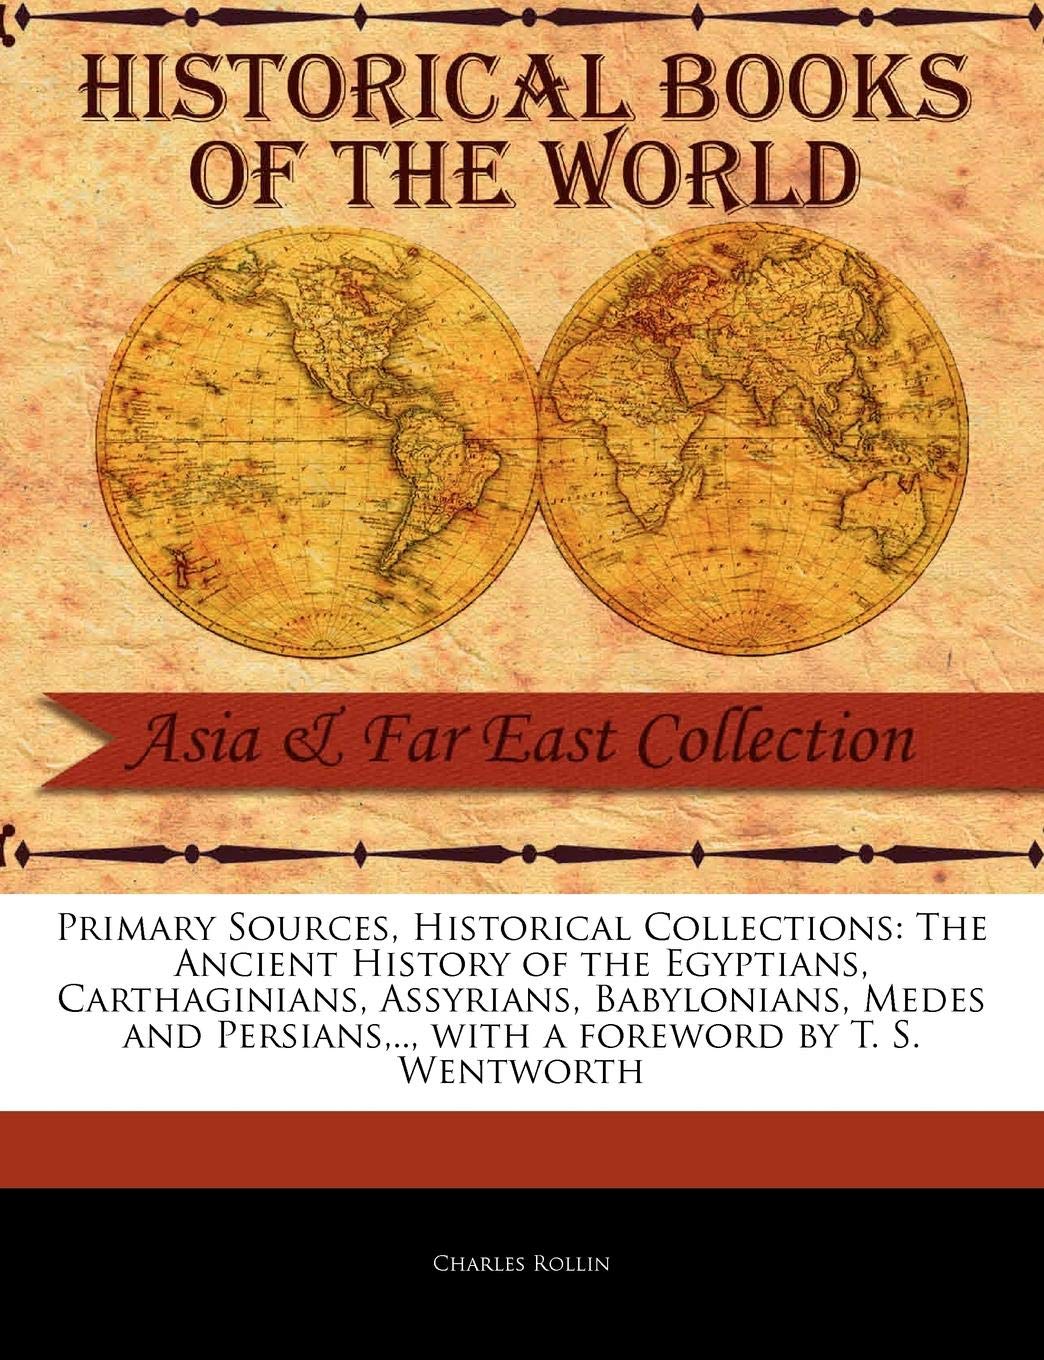 The Ancient History of the Egyptians, Carthaginians, Assyrians, Babylonians, Medes & Persians ...